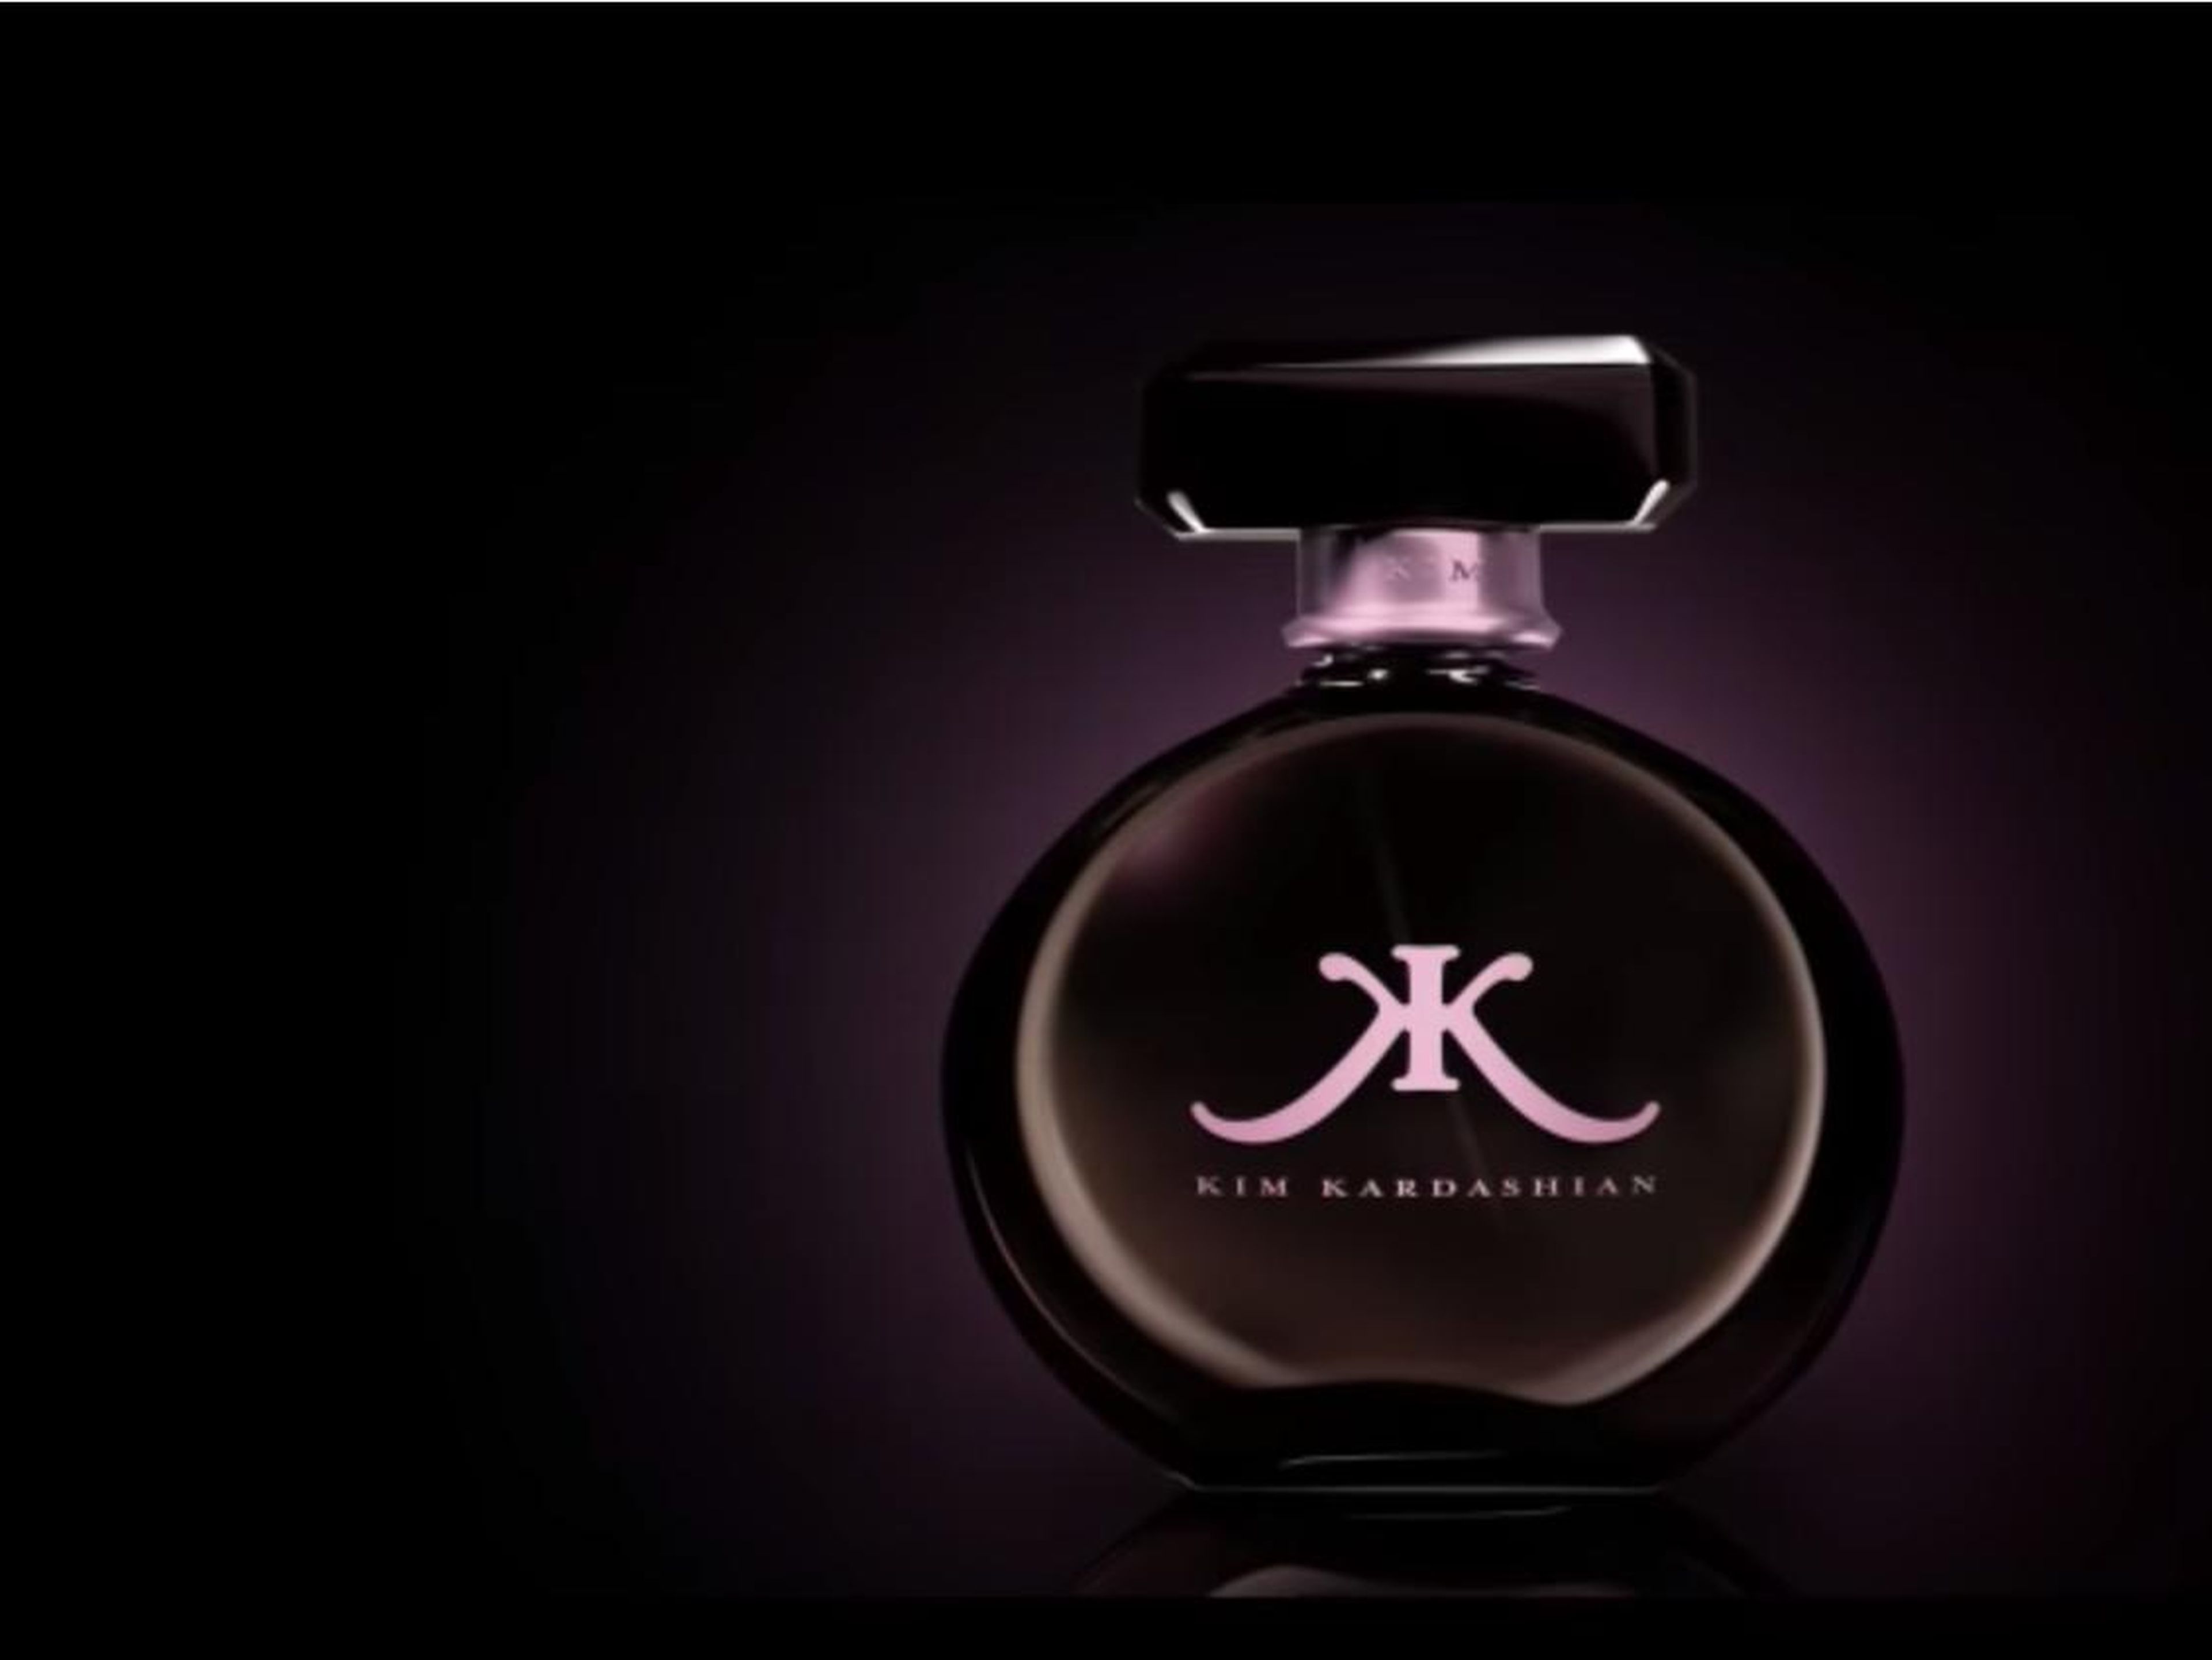 Six months later, Kim made her debut in the perfume world with her eponymous scent.